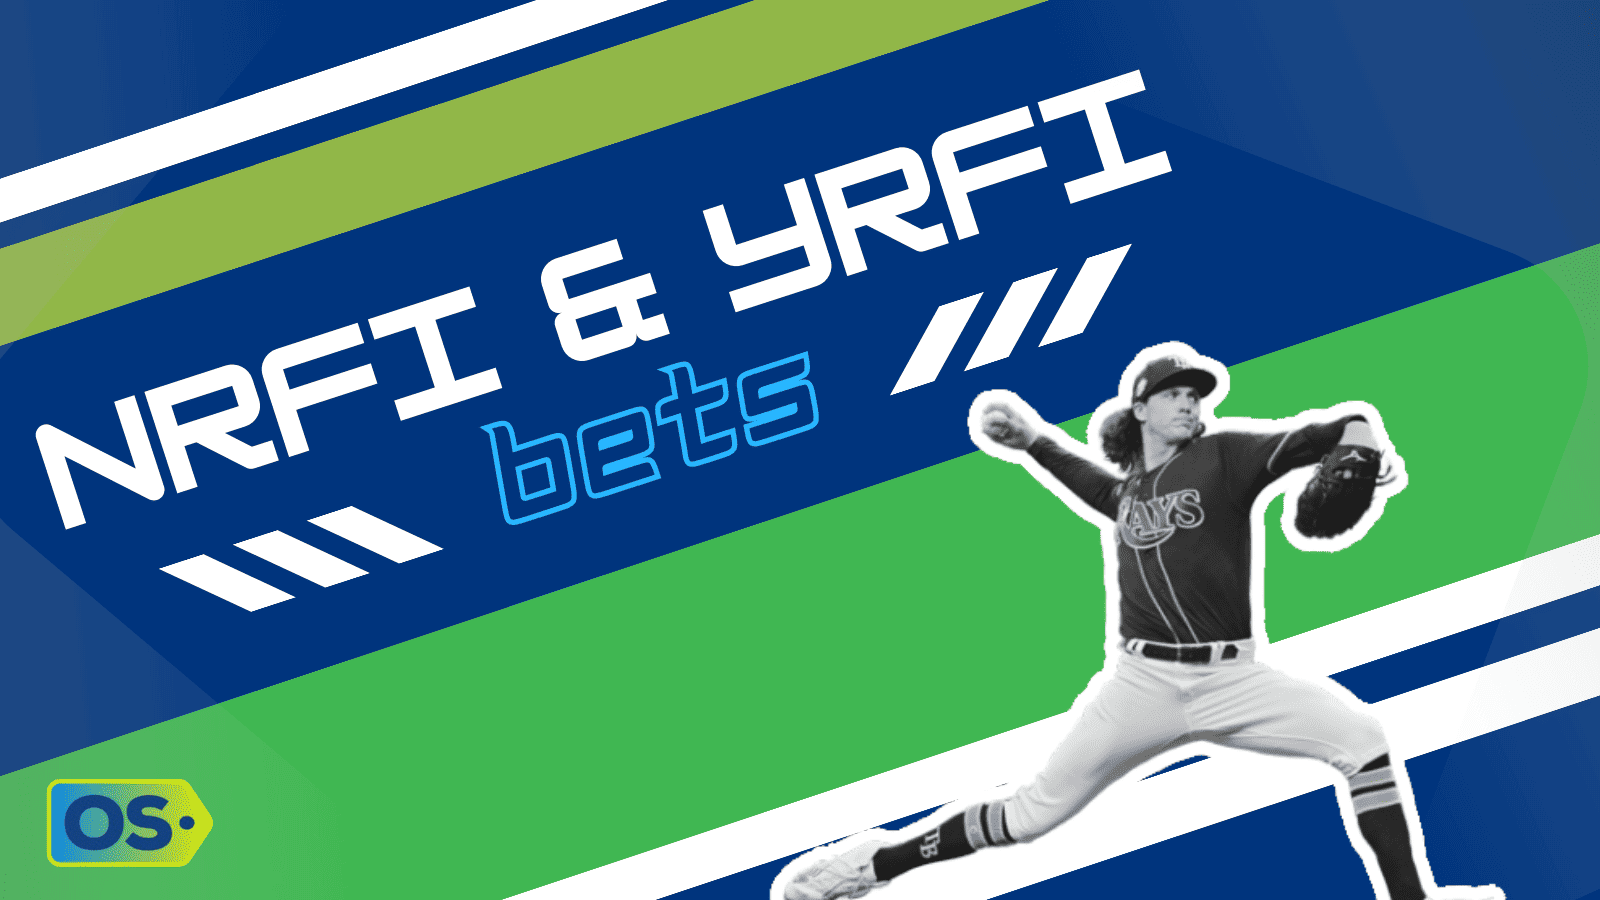 Today's best NRFI bets and YRFI plays include a no run first inning pick for Reds-Giants with two NRFI kings on the mound ...